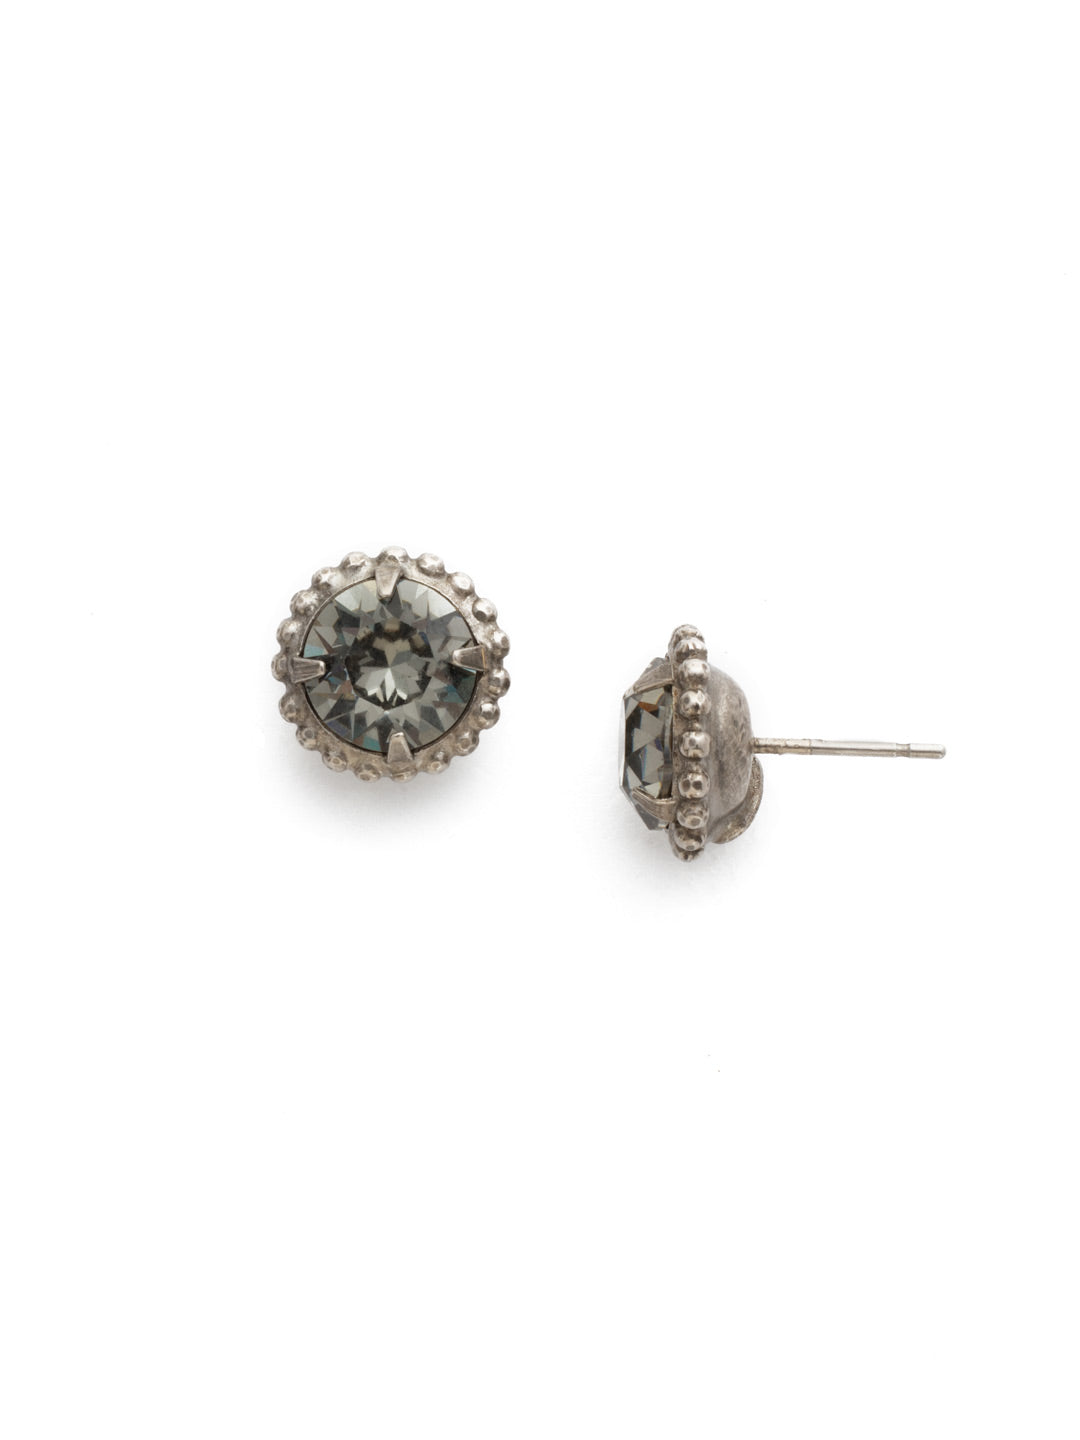 Simplicity Stud Earrings - EBY38ASBD - <p>A timeless classic, the Simplicity Stud Earrings feature round cut crystals in a variety of colors; accented with a halo of metal beaded detail. Need help picking a stud? <a href="https://www.sorrelli.com/blogs/sisterhood/round-stud-earrings-101-a-rundown-of-sizes-styles-and-sparkle">Check out our size guide!</a> From Sorrelli's Black Diamond collection in our Antique Silver-tone finish.</p>